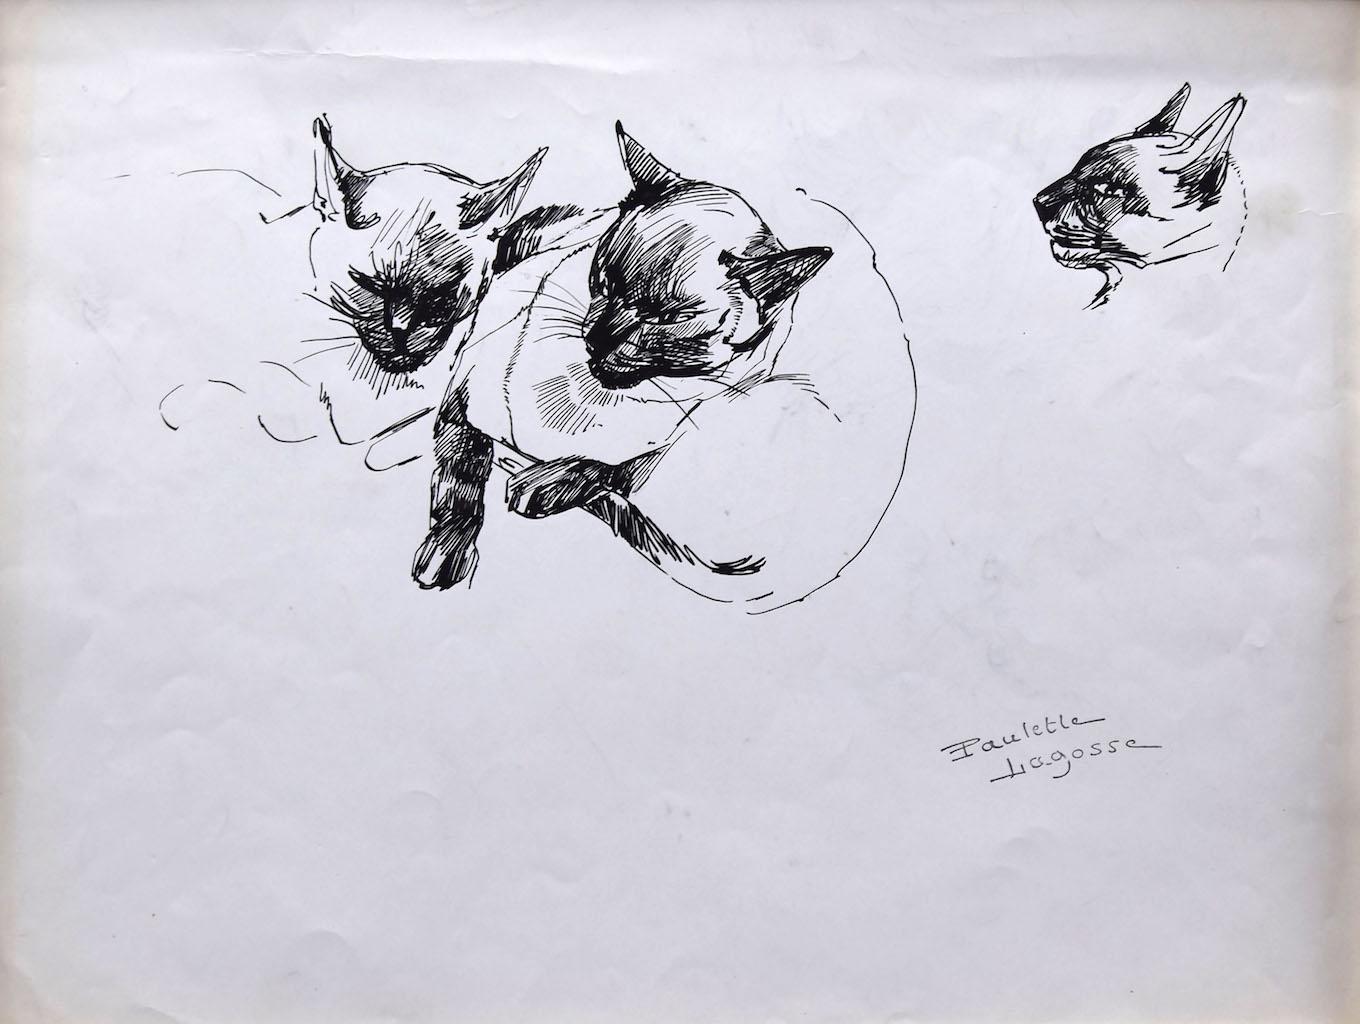 The Cats is an original drawing in pen on ivory-colored paper, realized by Marie Paulette Lagosse (1921-1996).

Hand-signed on the lower right in pen. with a drawing of other cats on the rear.

The state of preservation of the artwork is